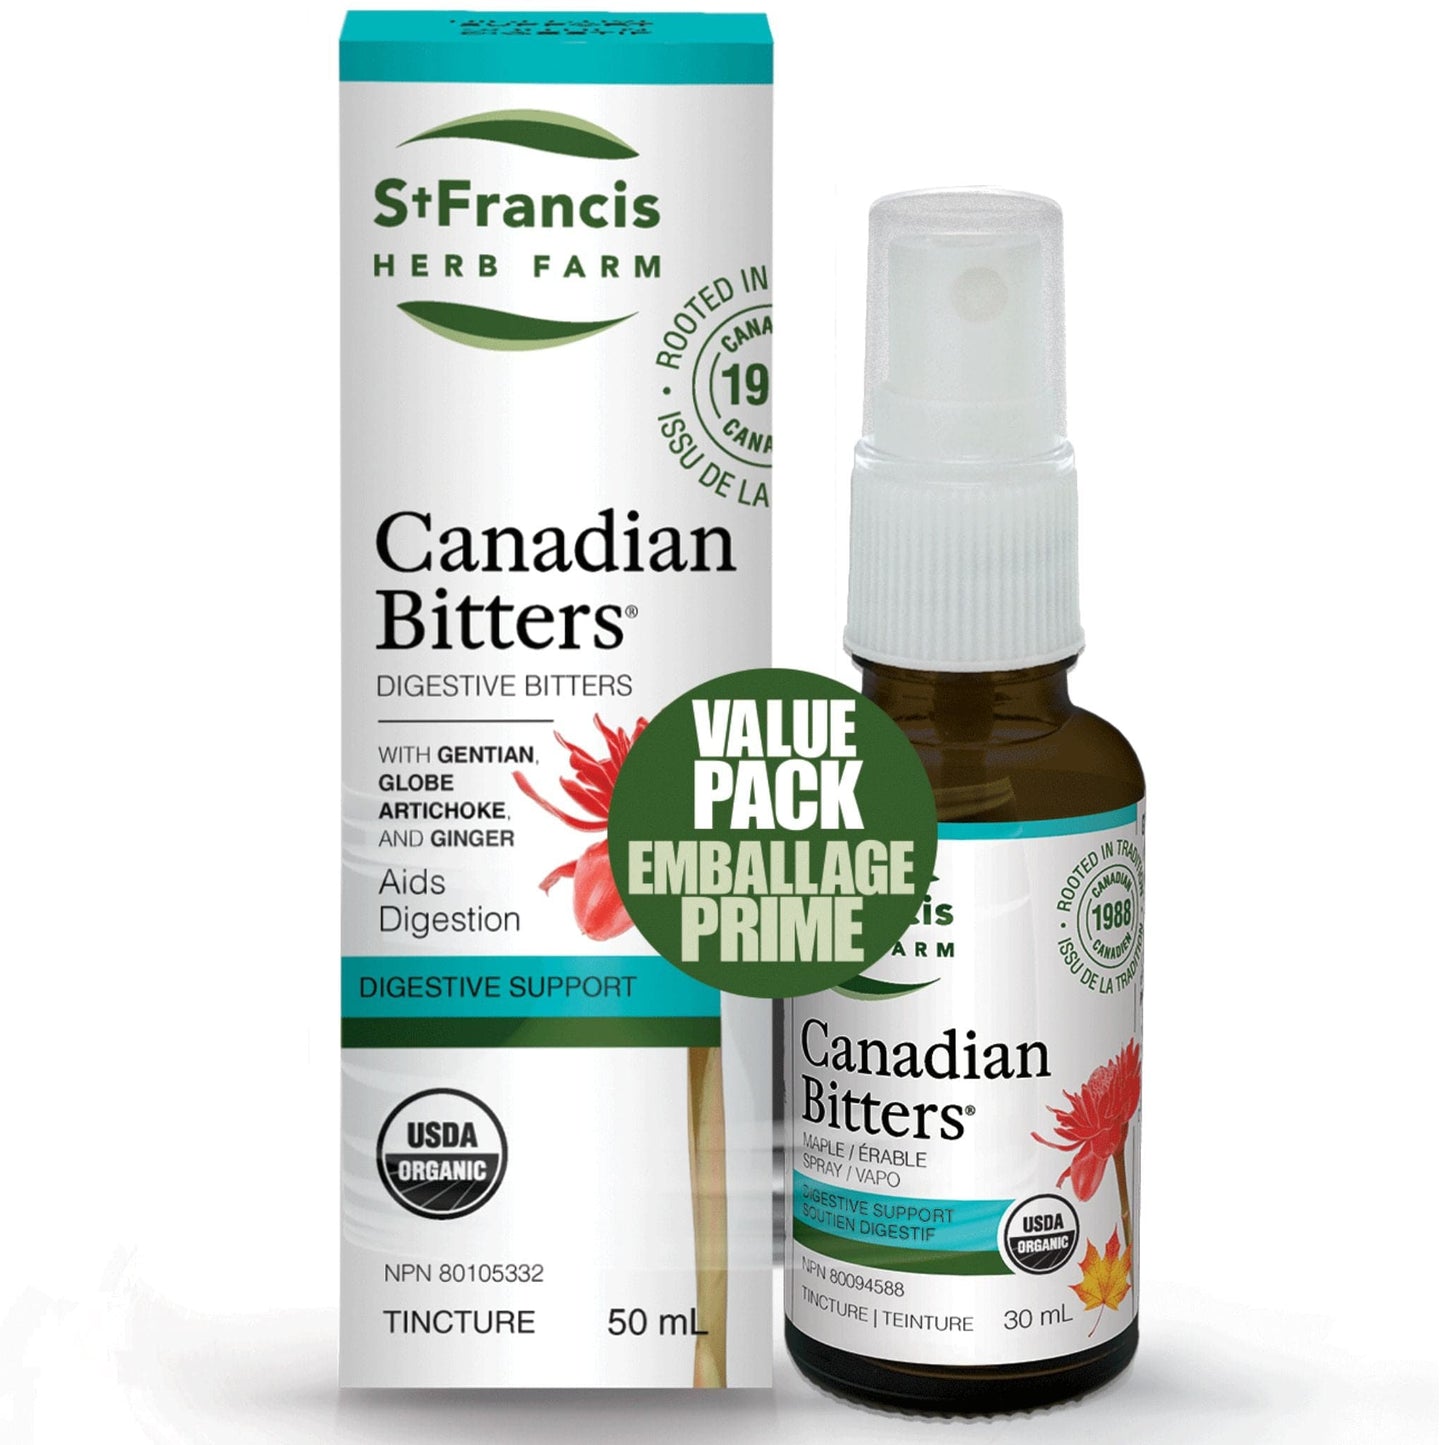 st-francis-canadian-bitters-value-pack-50ml-plus-50ml